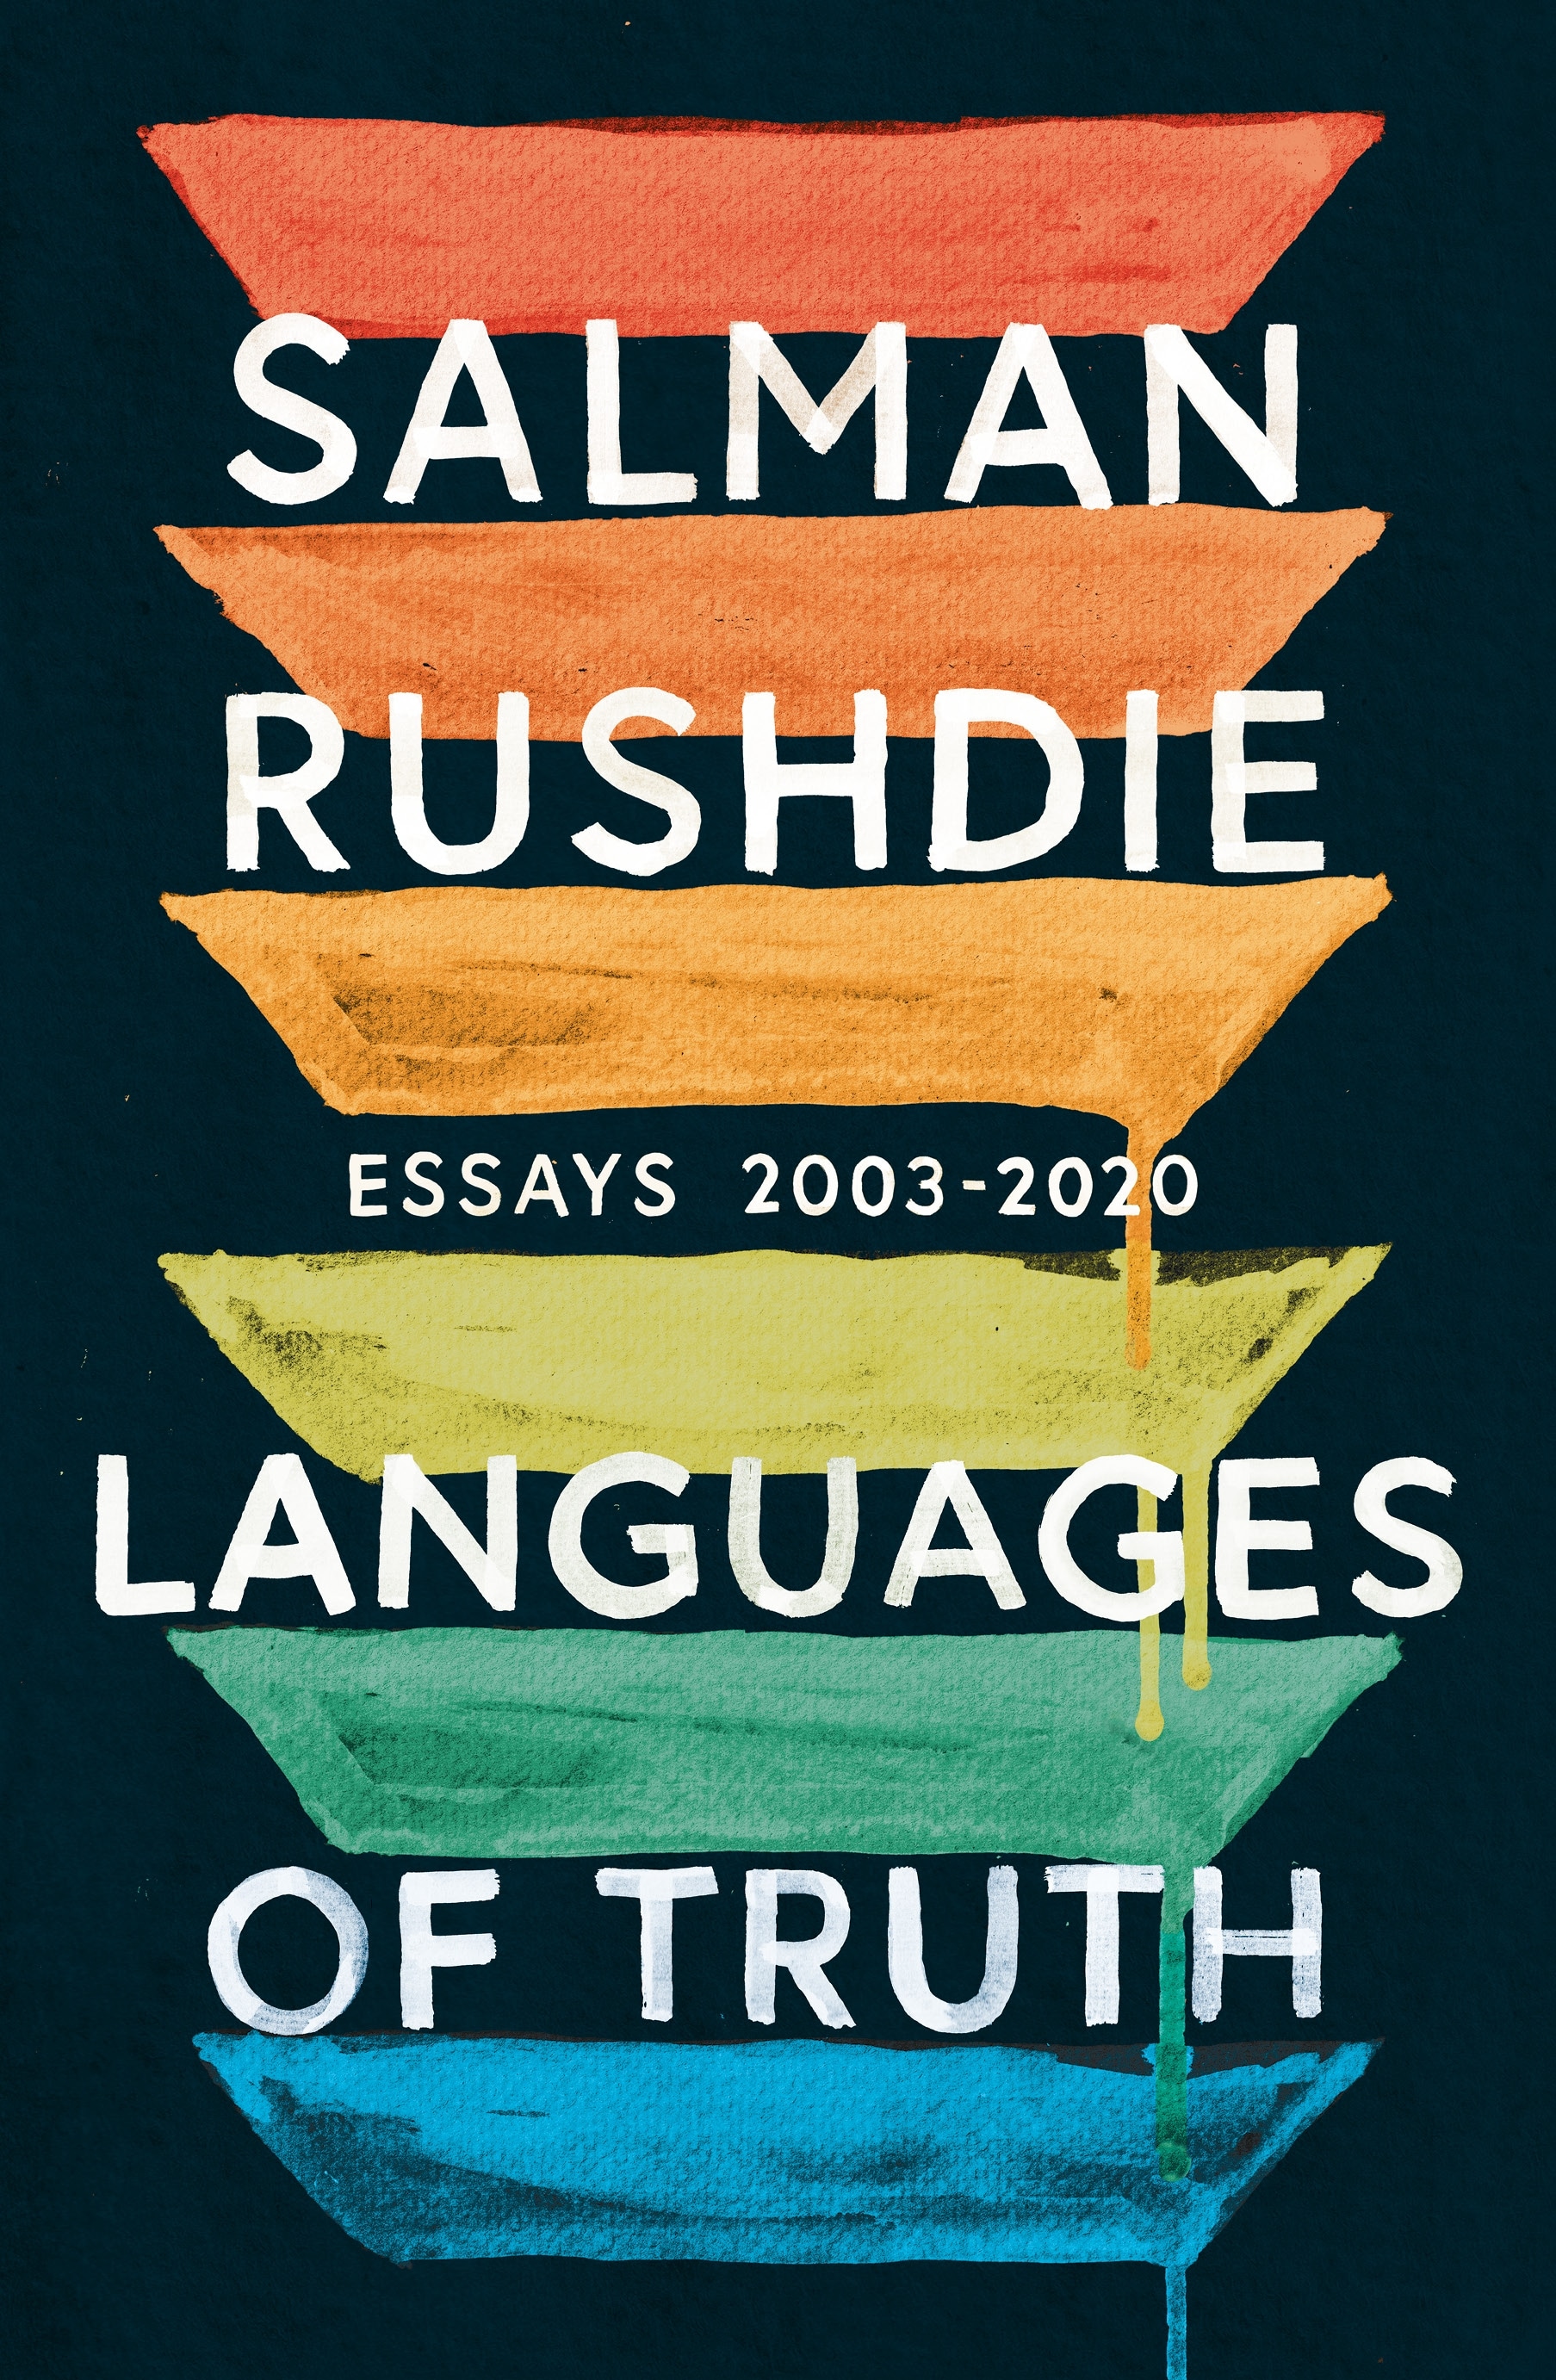 Book “Languages of Truth” by Salman Rushdie — May 27, 2021